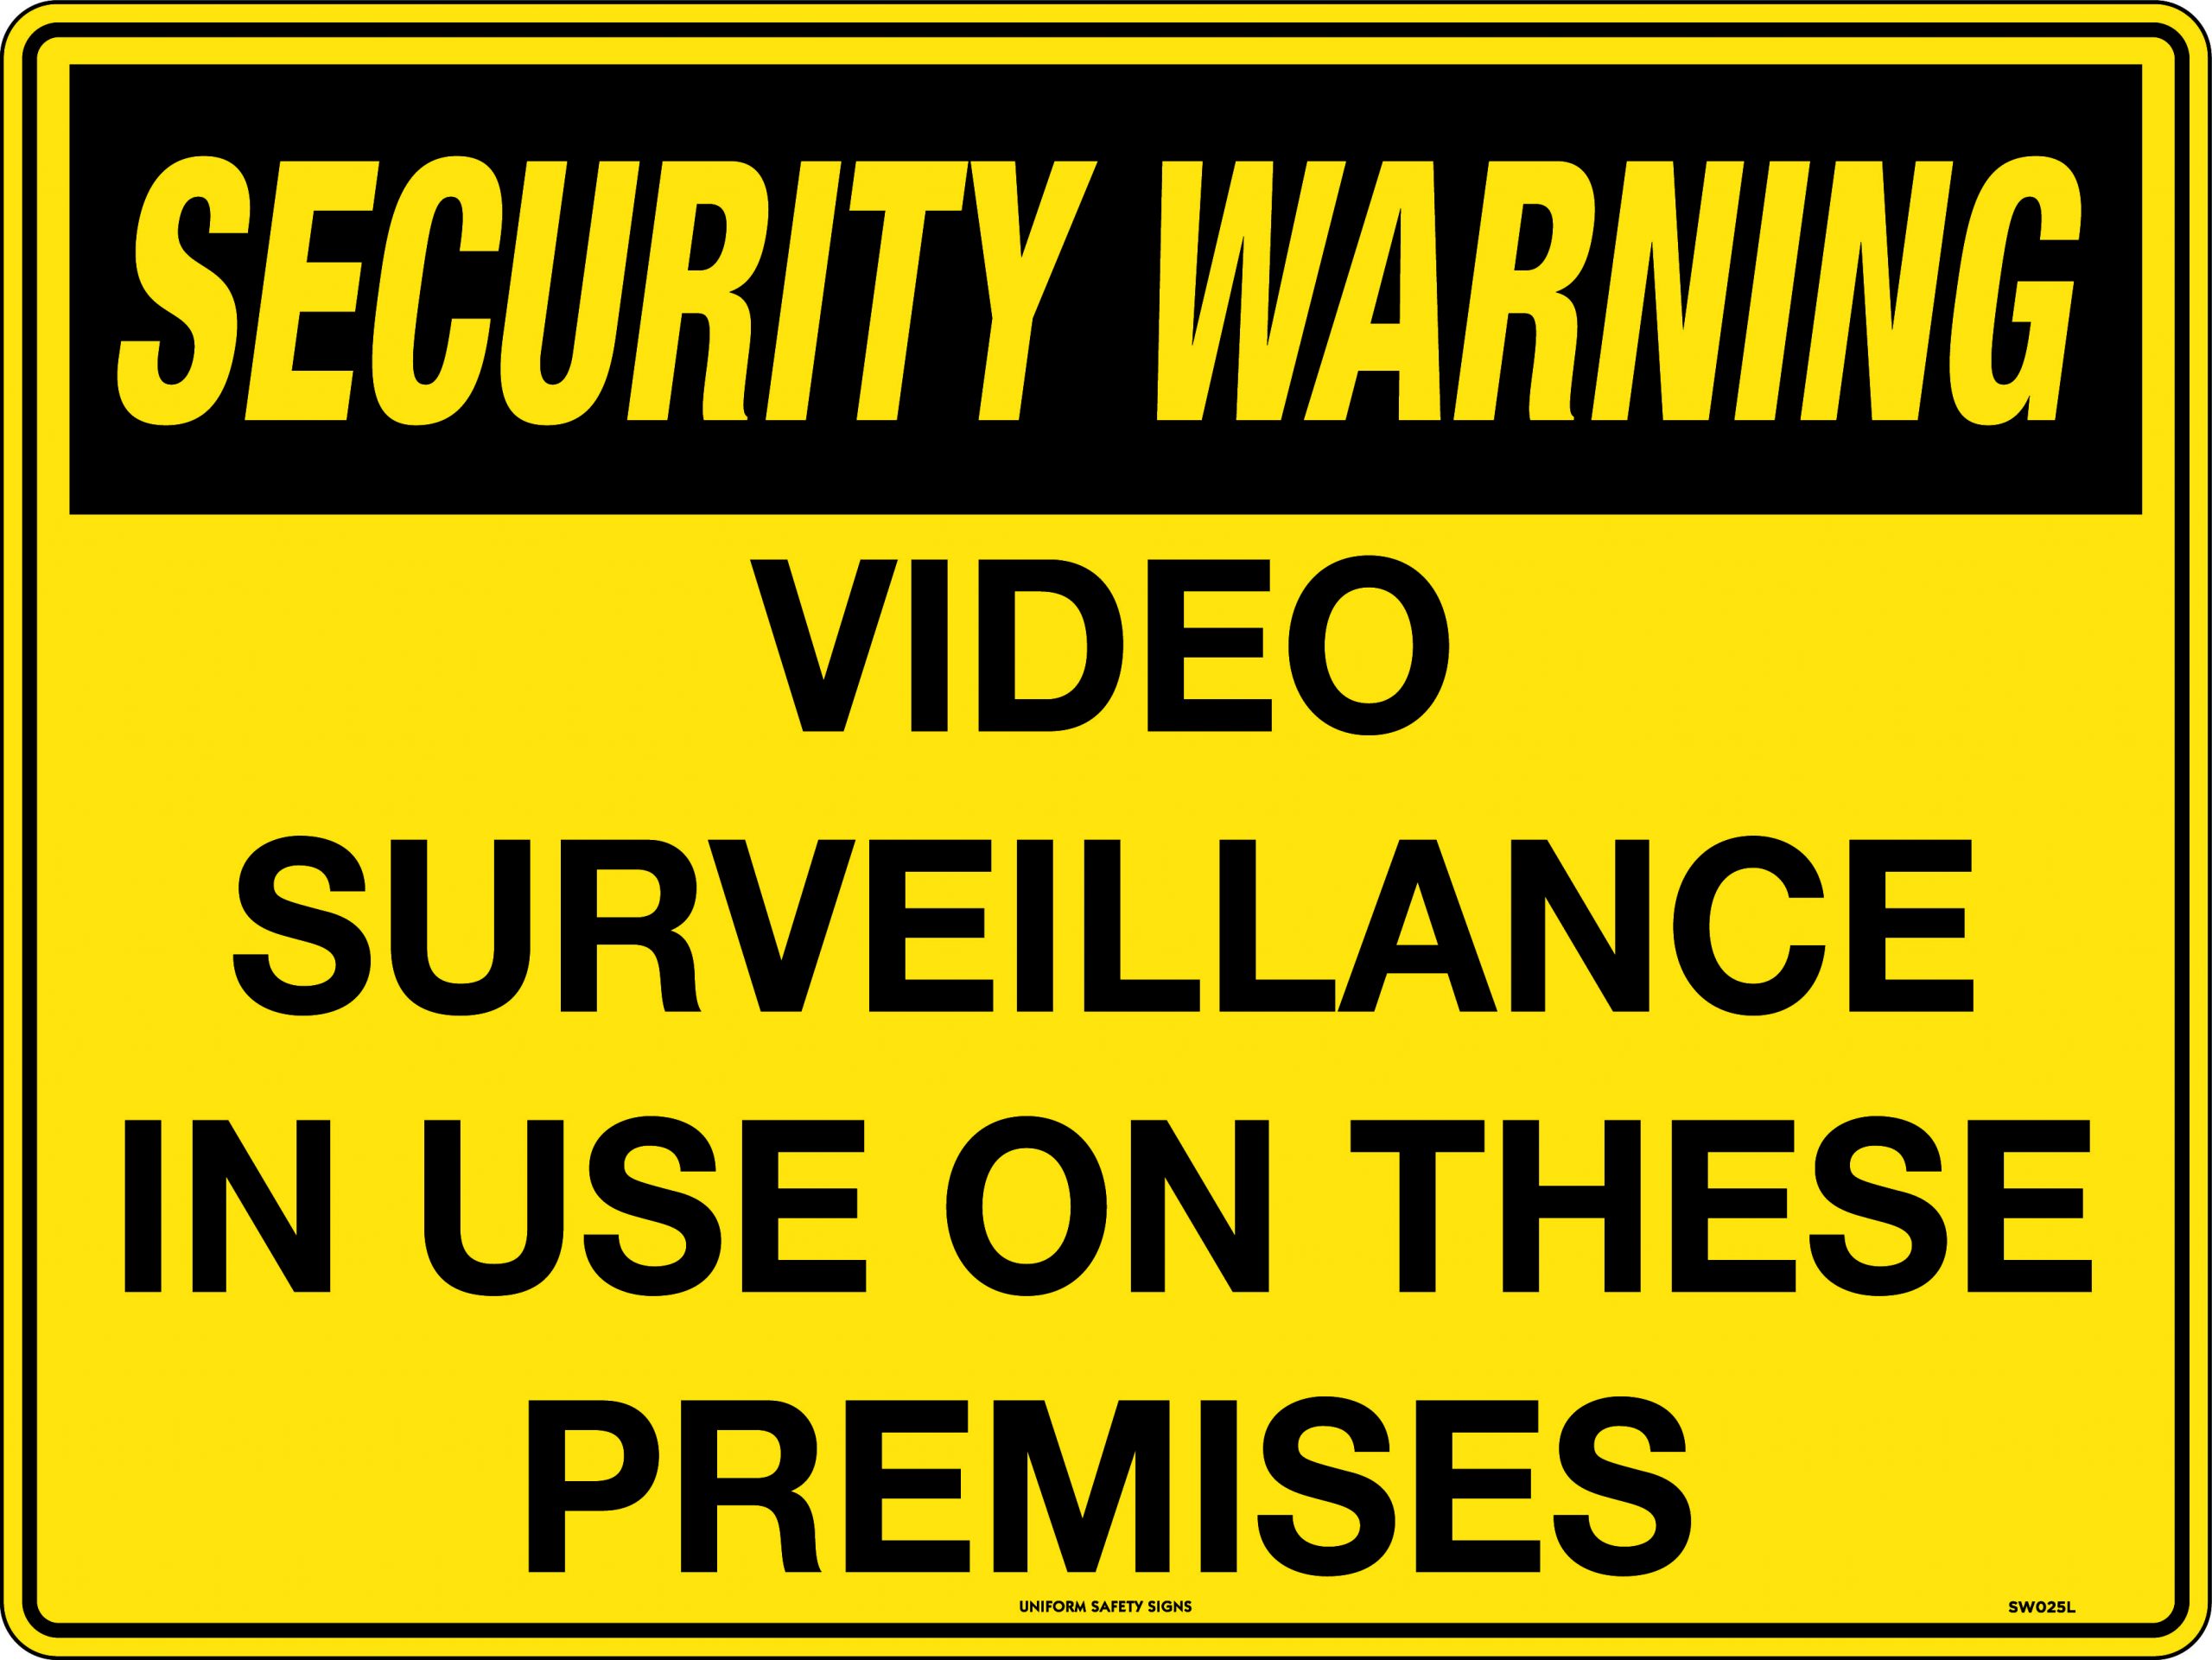 SIGN 600 X 450 METAL SECURITY WARNING VIDEO SURVEILLANCE IN USE